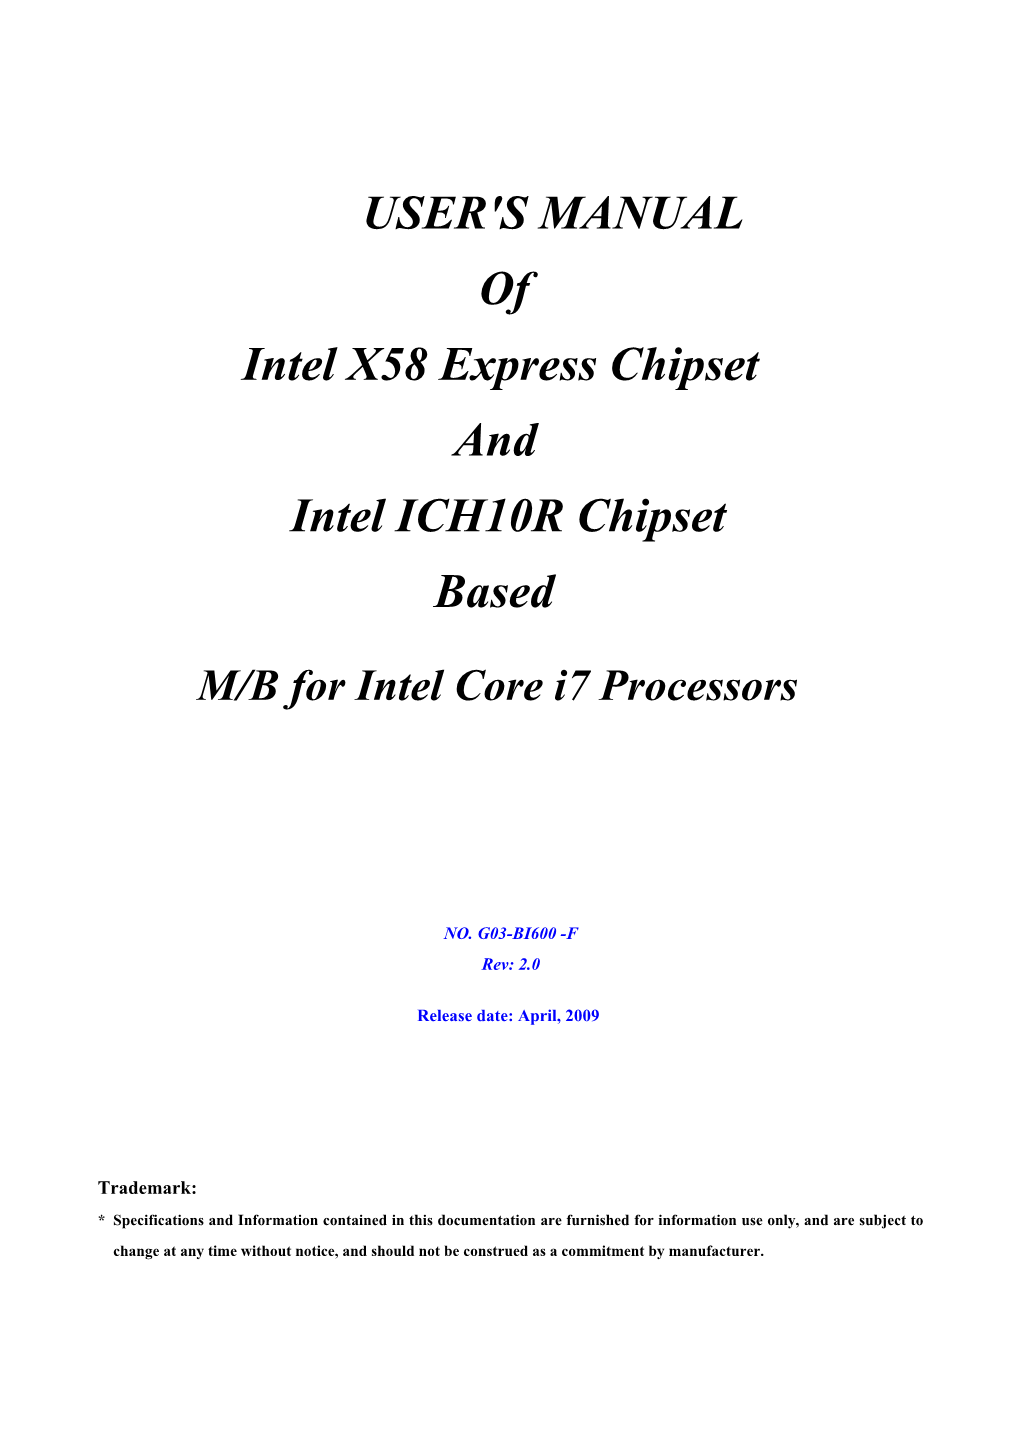 USER's MANUAL of Intel X58 Express Chipset and Intel ICH10R Chipset Based